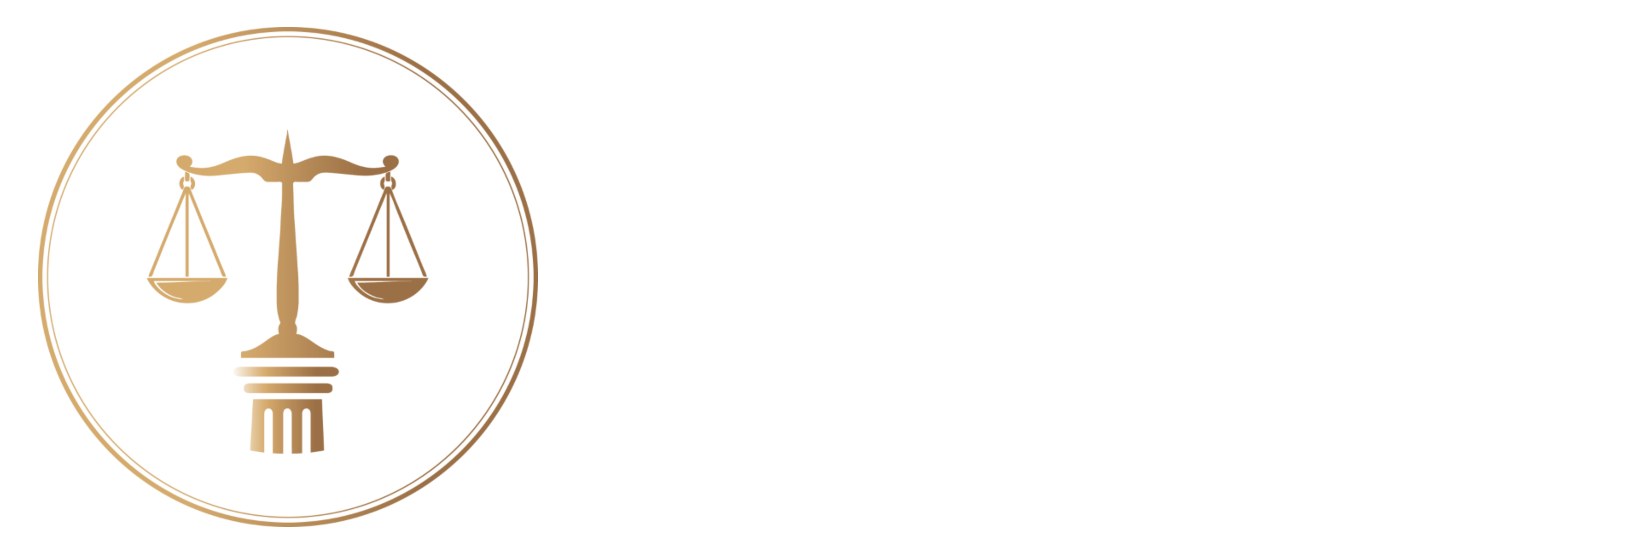 Institute for Equity and Justice